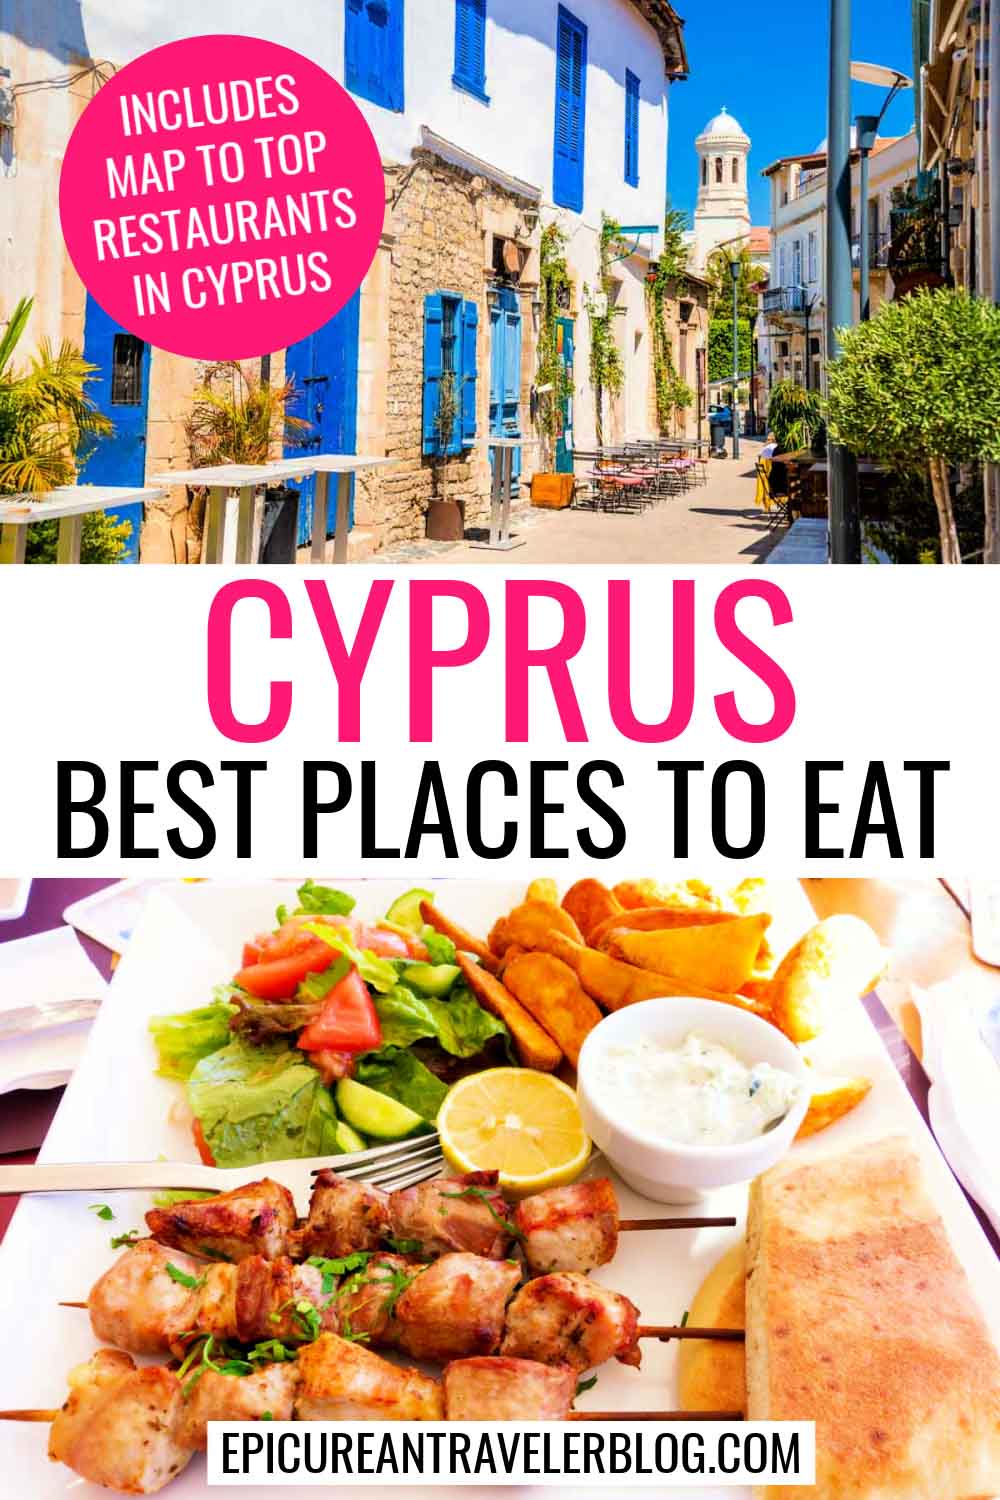 Cyprus best places to eat with map to top restaurants in Cyrpus with images of a street in Limassol and Cypriot food